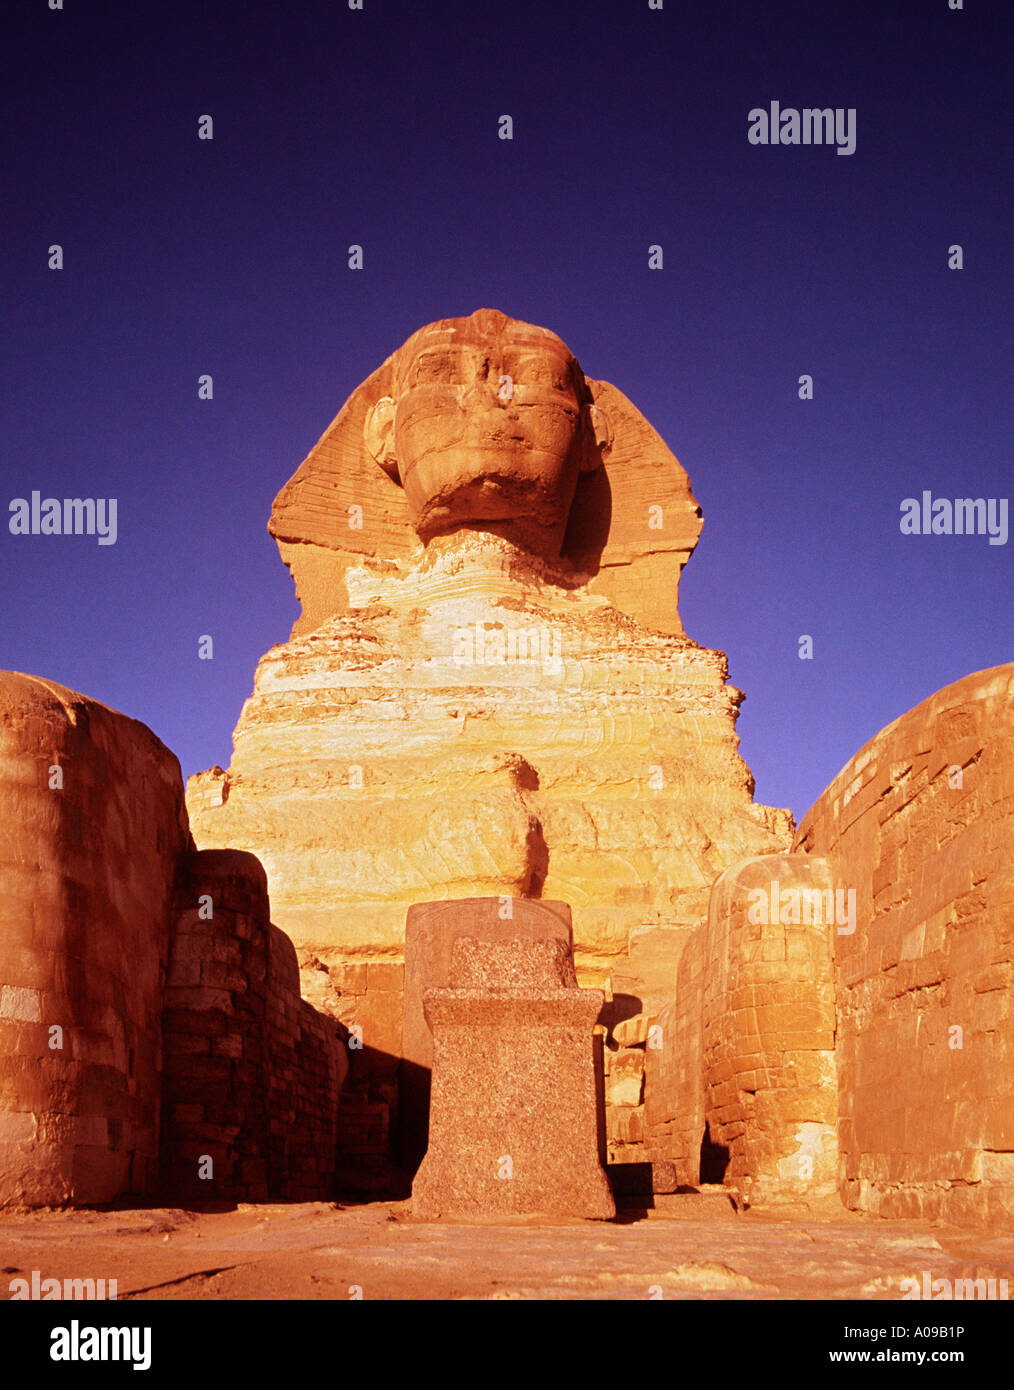 The Sphinx at sunrise Giza, Cairo, Egypt, North Africa. Dramatic close up birds eye front view Stock Photo